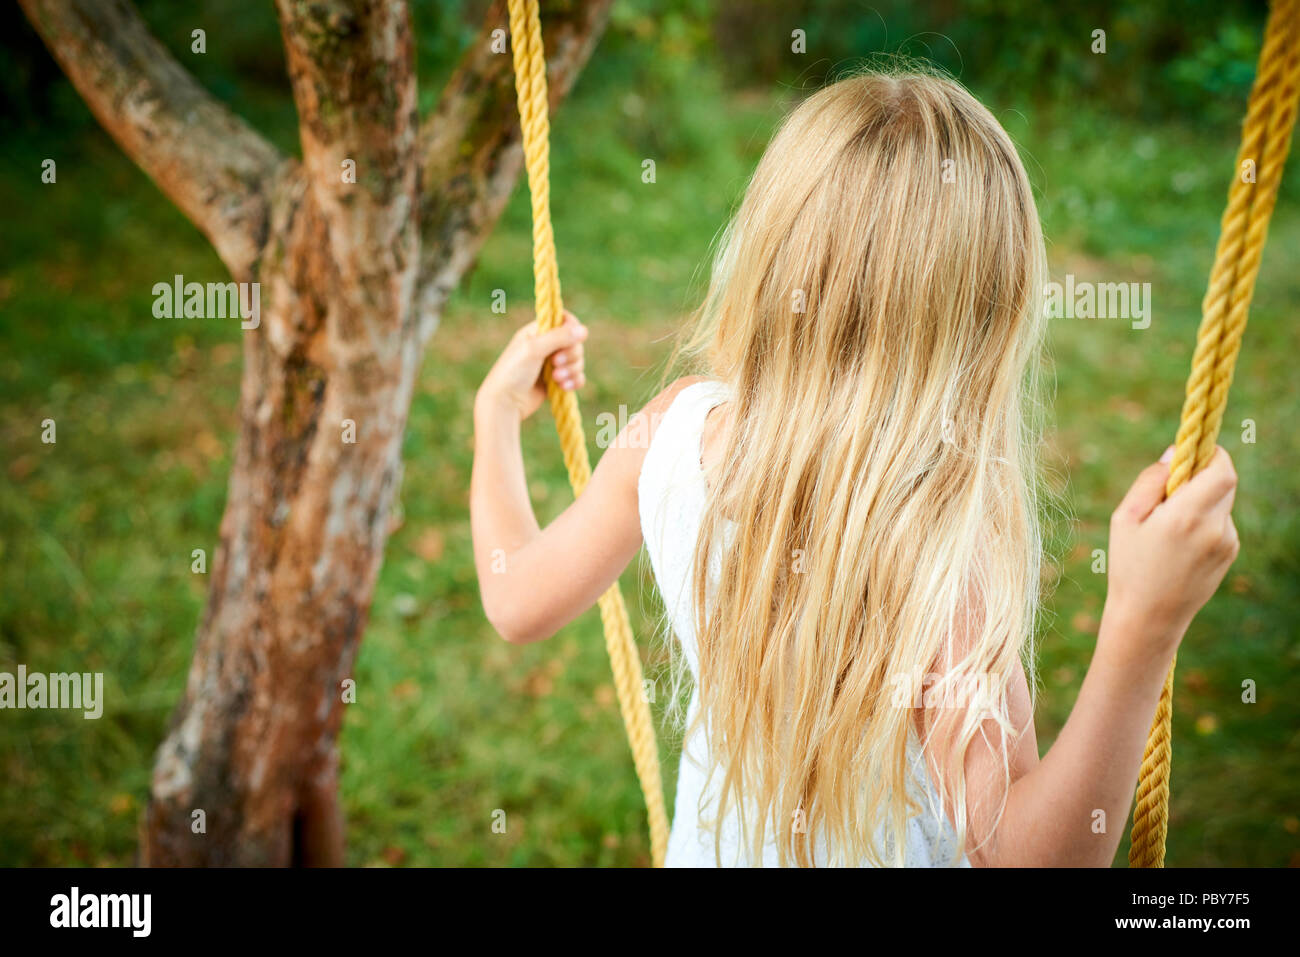 A child cute girl swinging on a rope ladder in summer in the garden Stock Photo